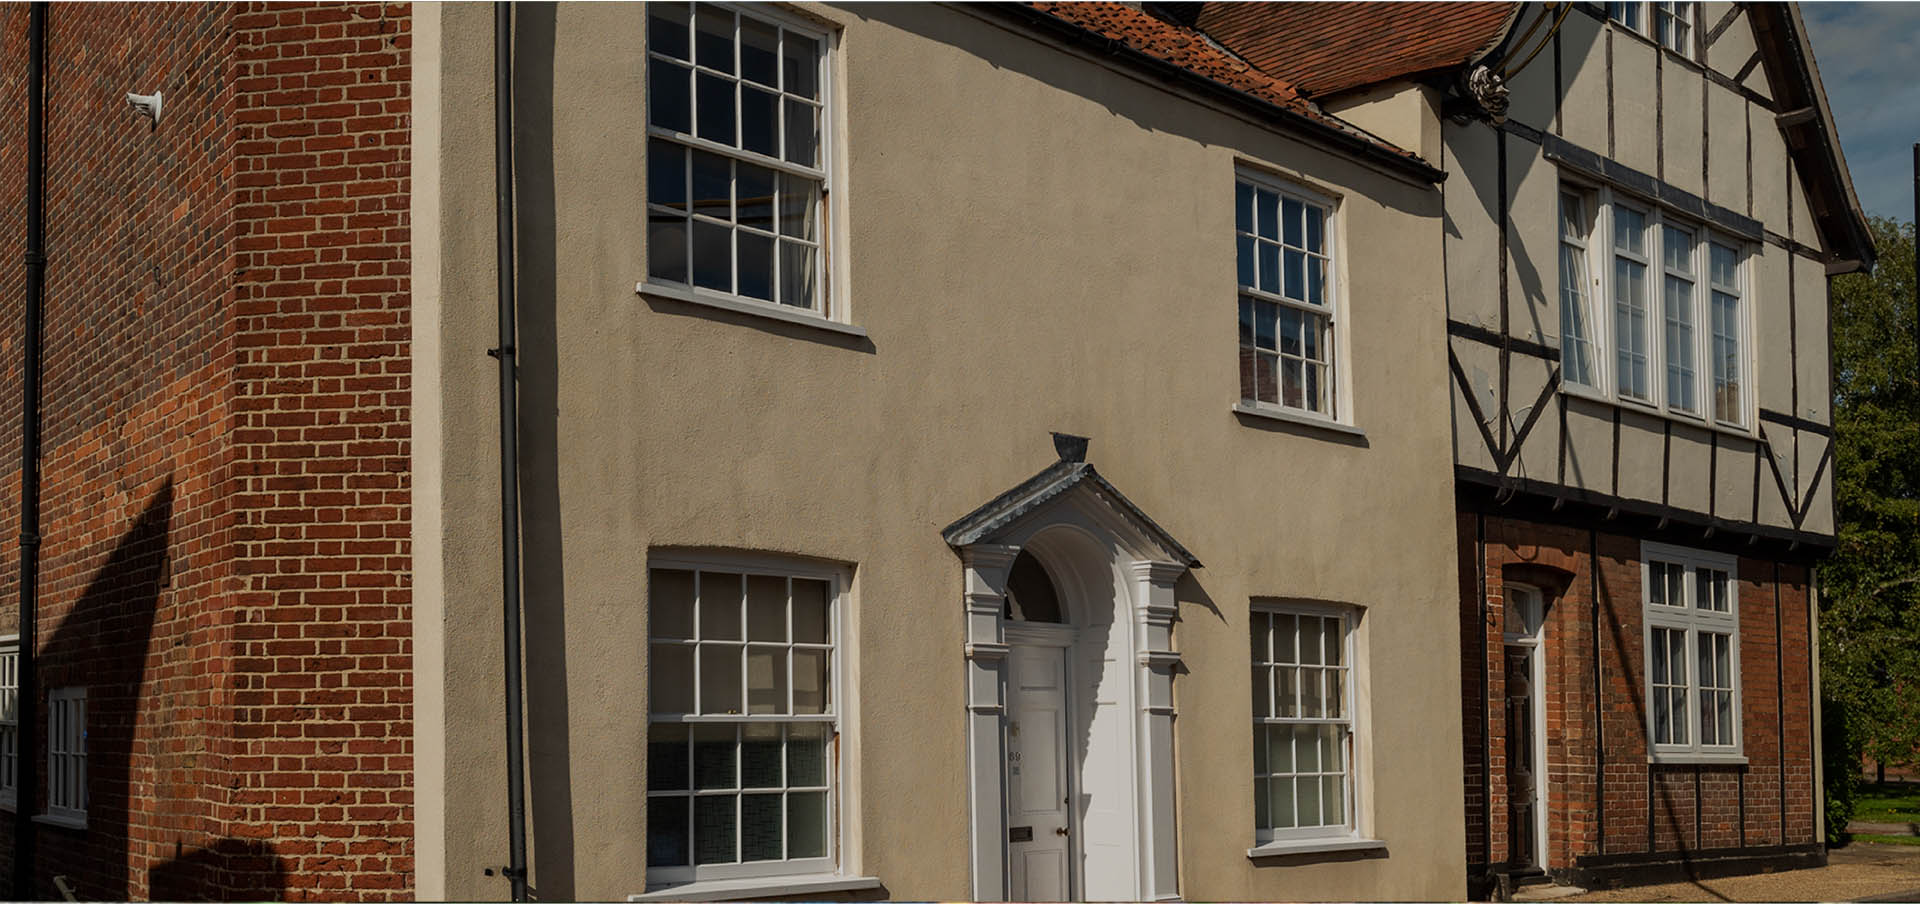 Residential property to let in Beccles, Suffolk